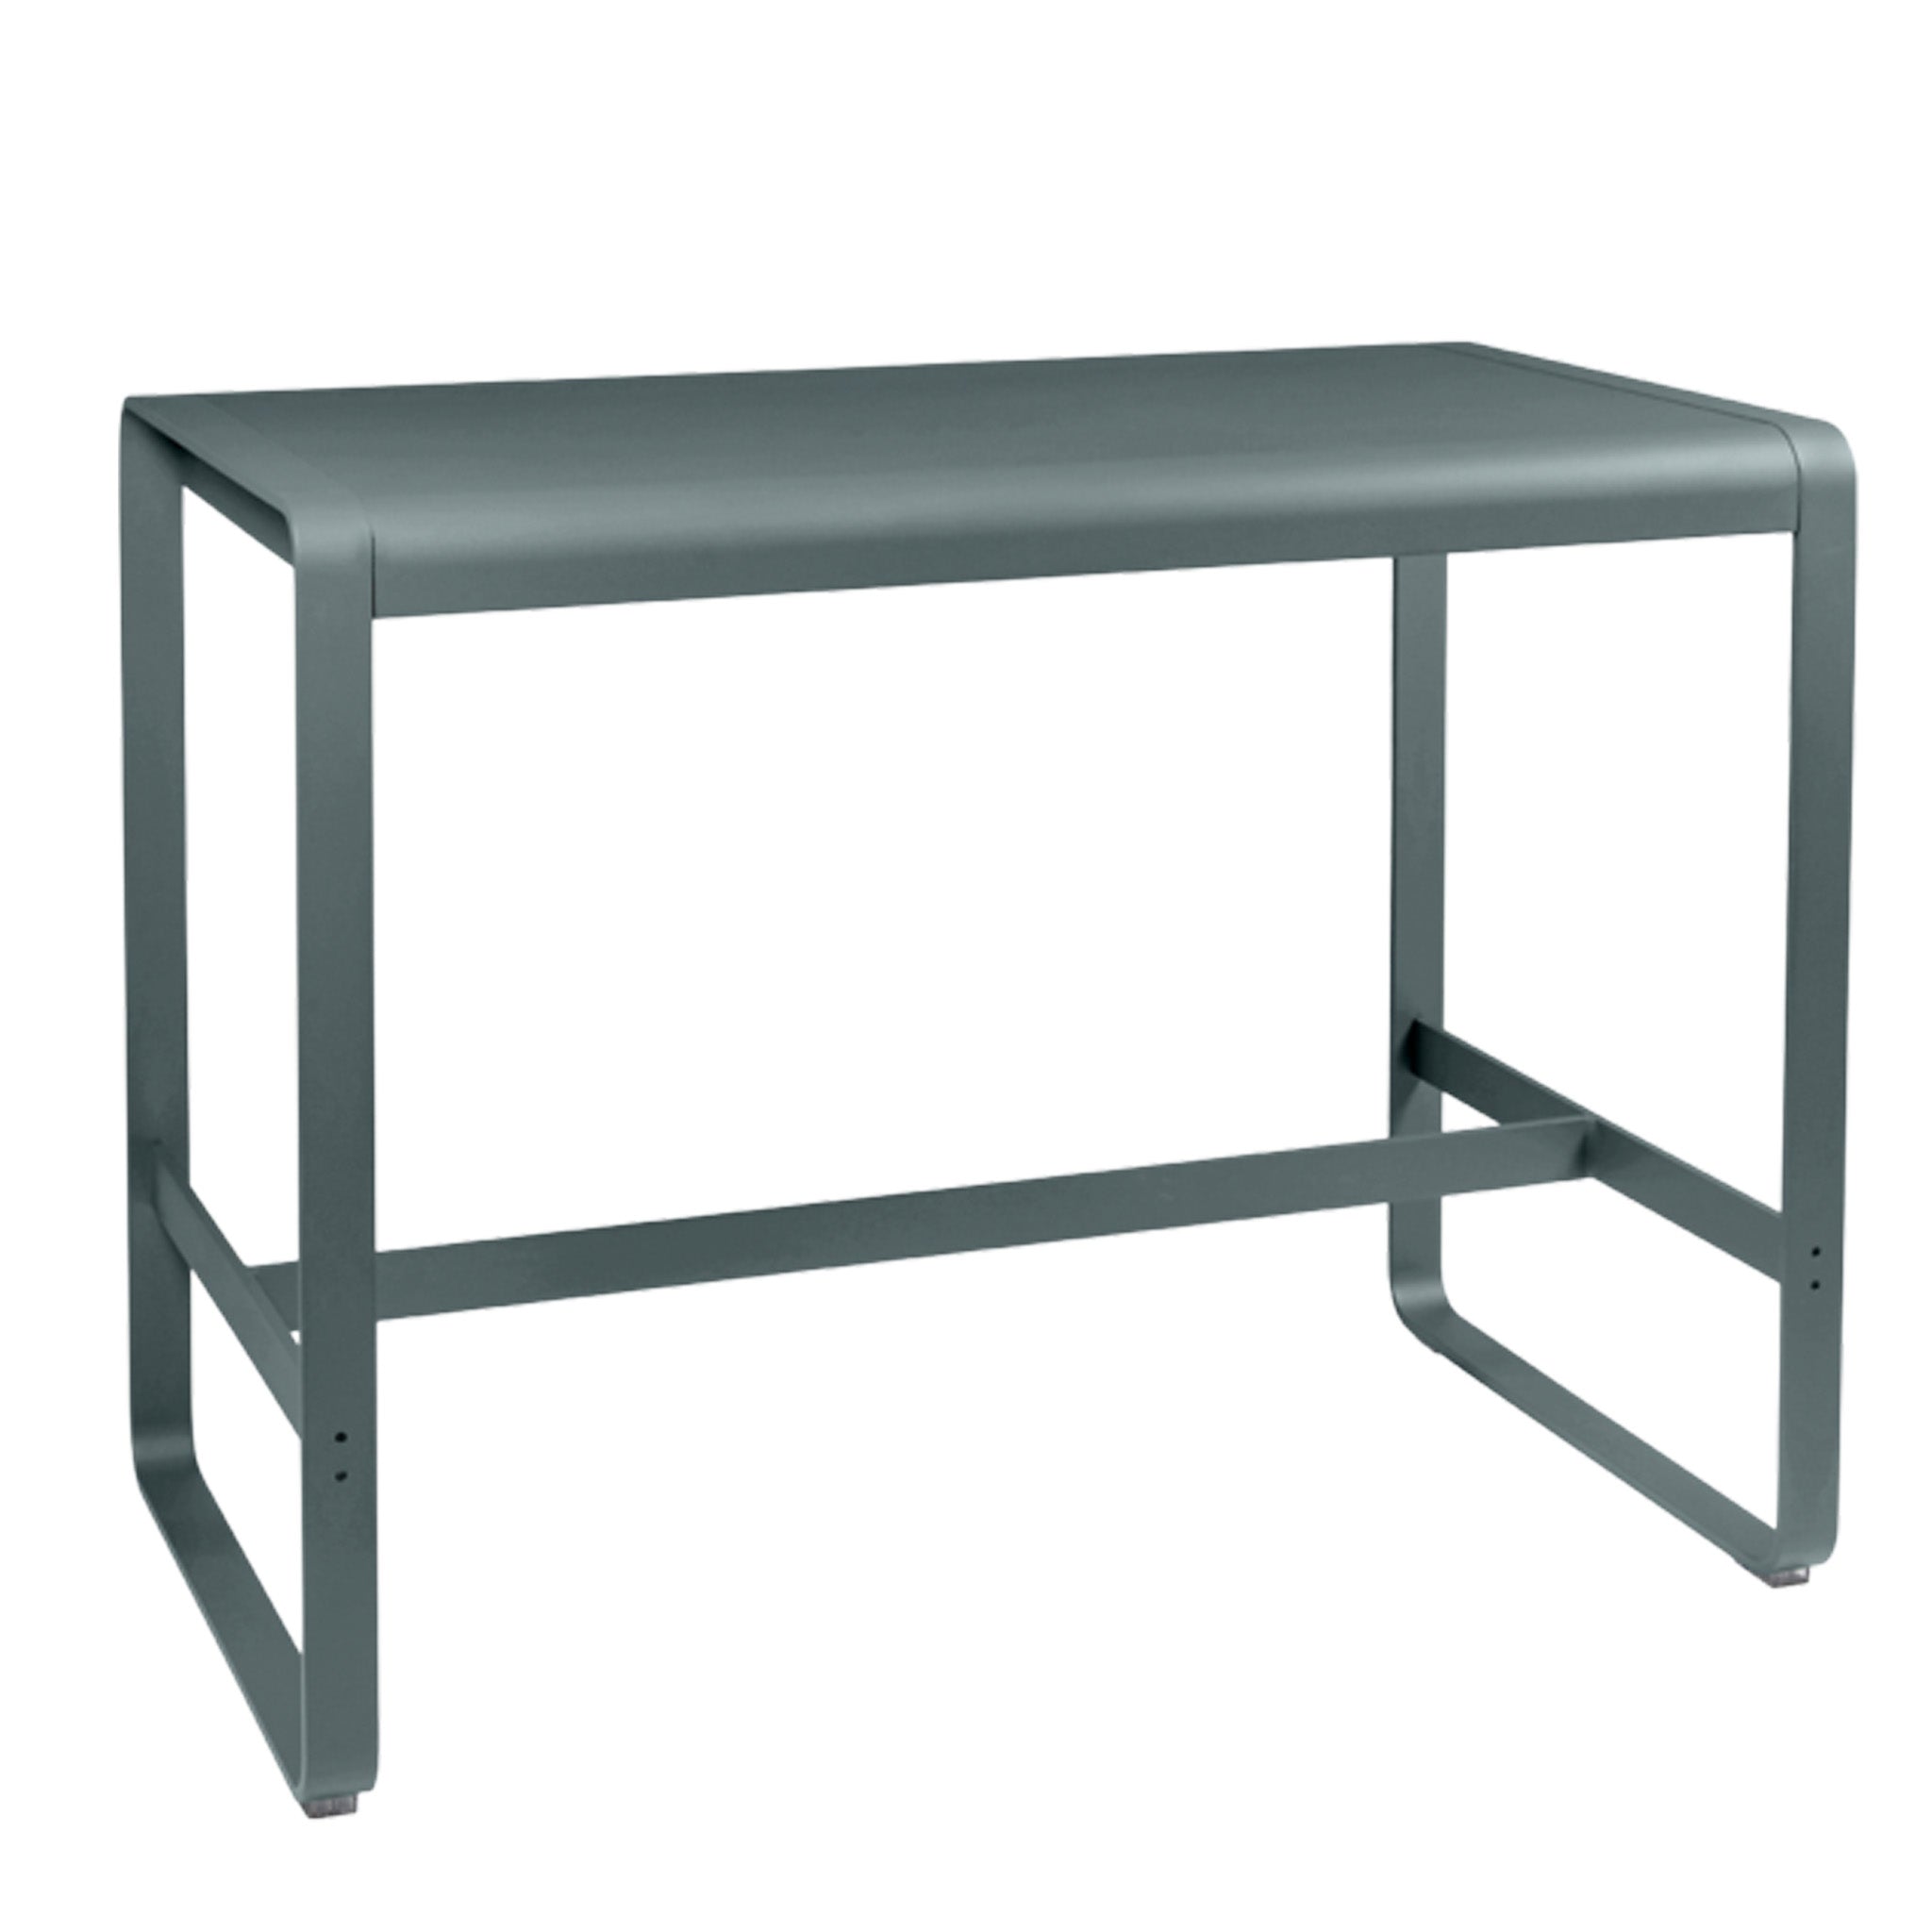 Bellevie High Table by Fermob